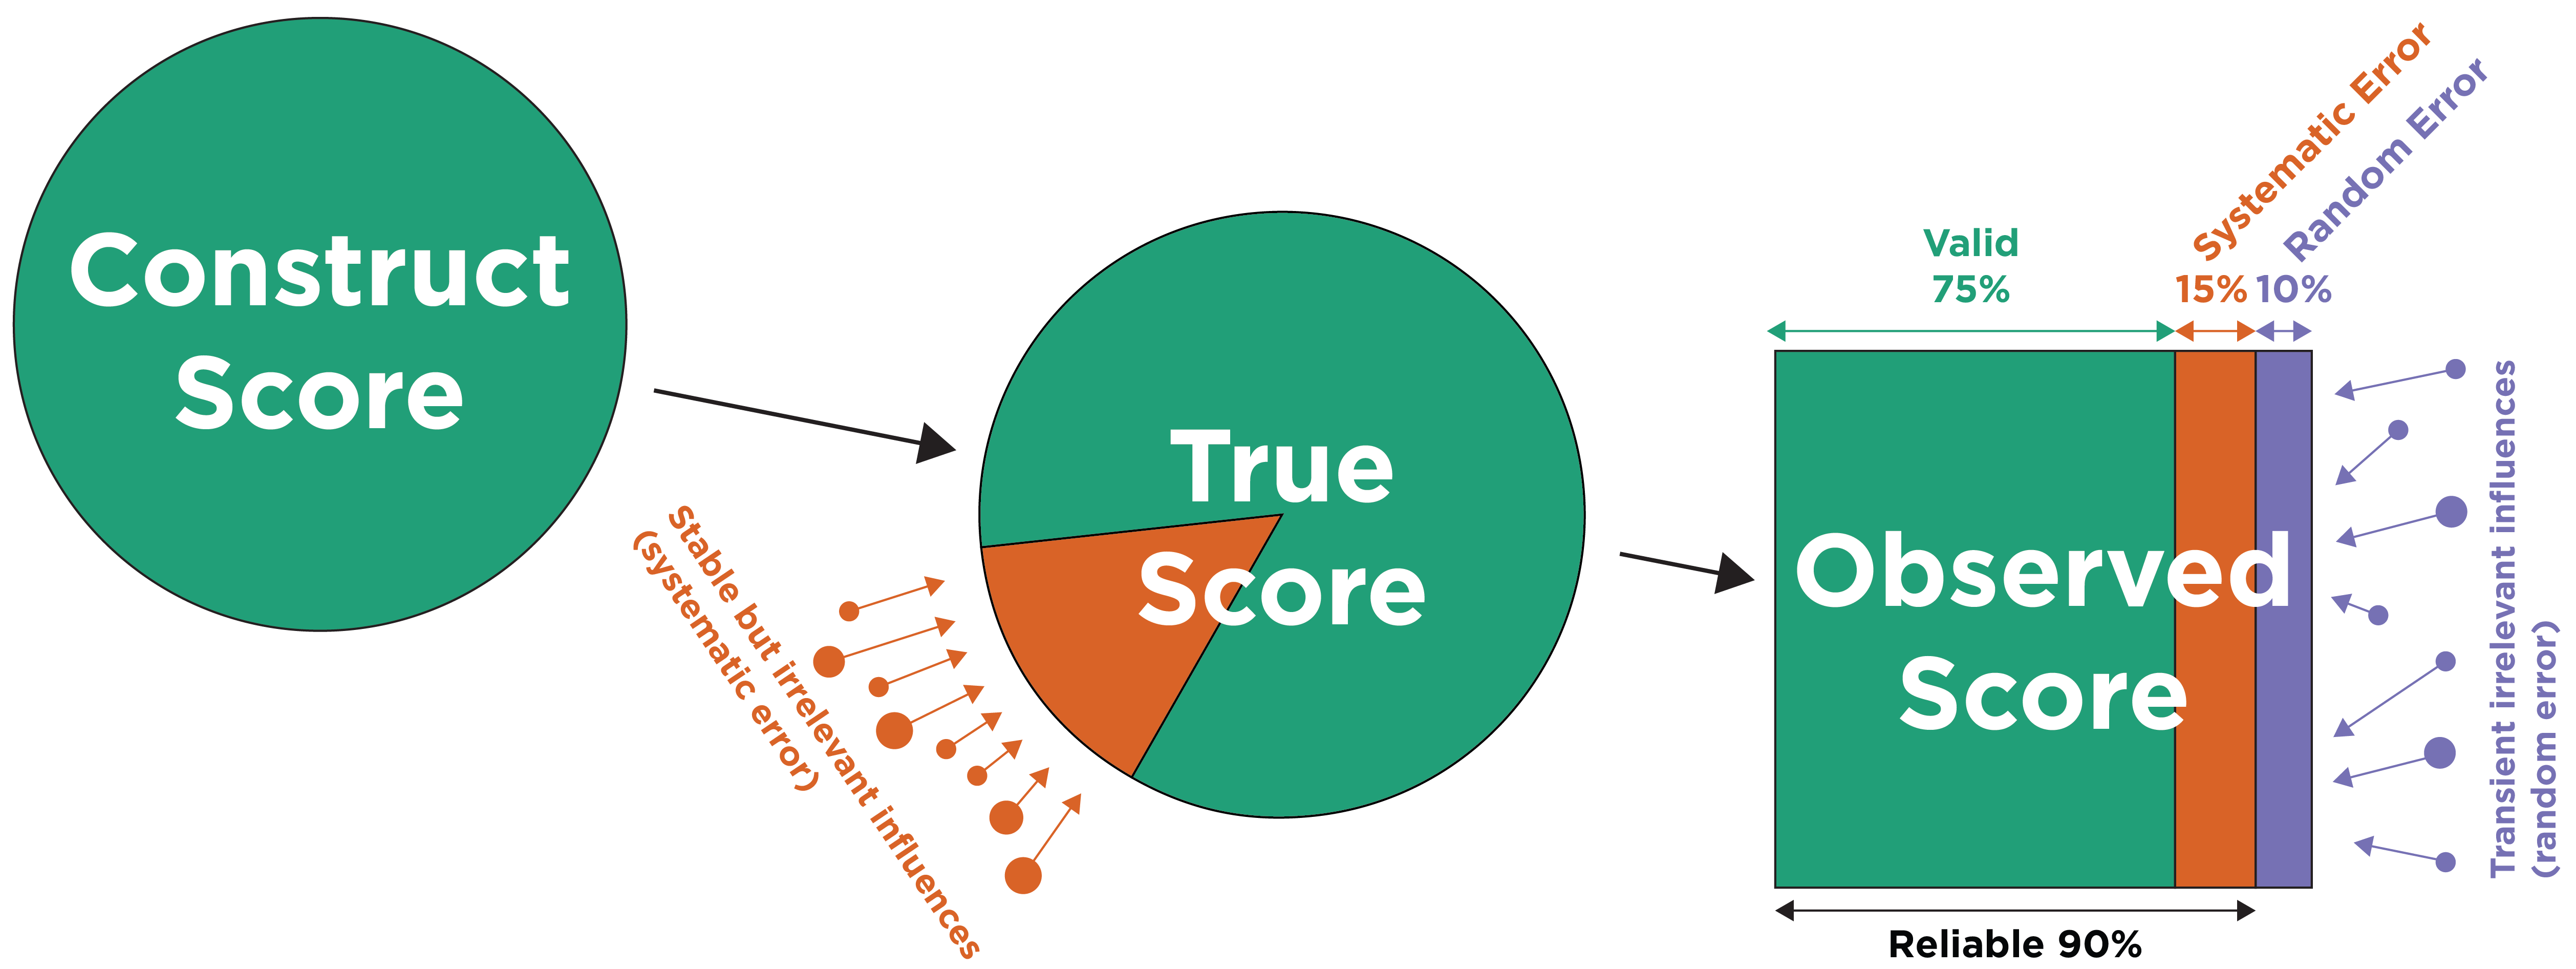 Distinctions Between Construct Score, True Score, and Observed Score, in Addition to Reliability, Validity, Systematic Error, and Random Error. (Adapted from  W. Joel Schneider.)